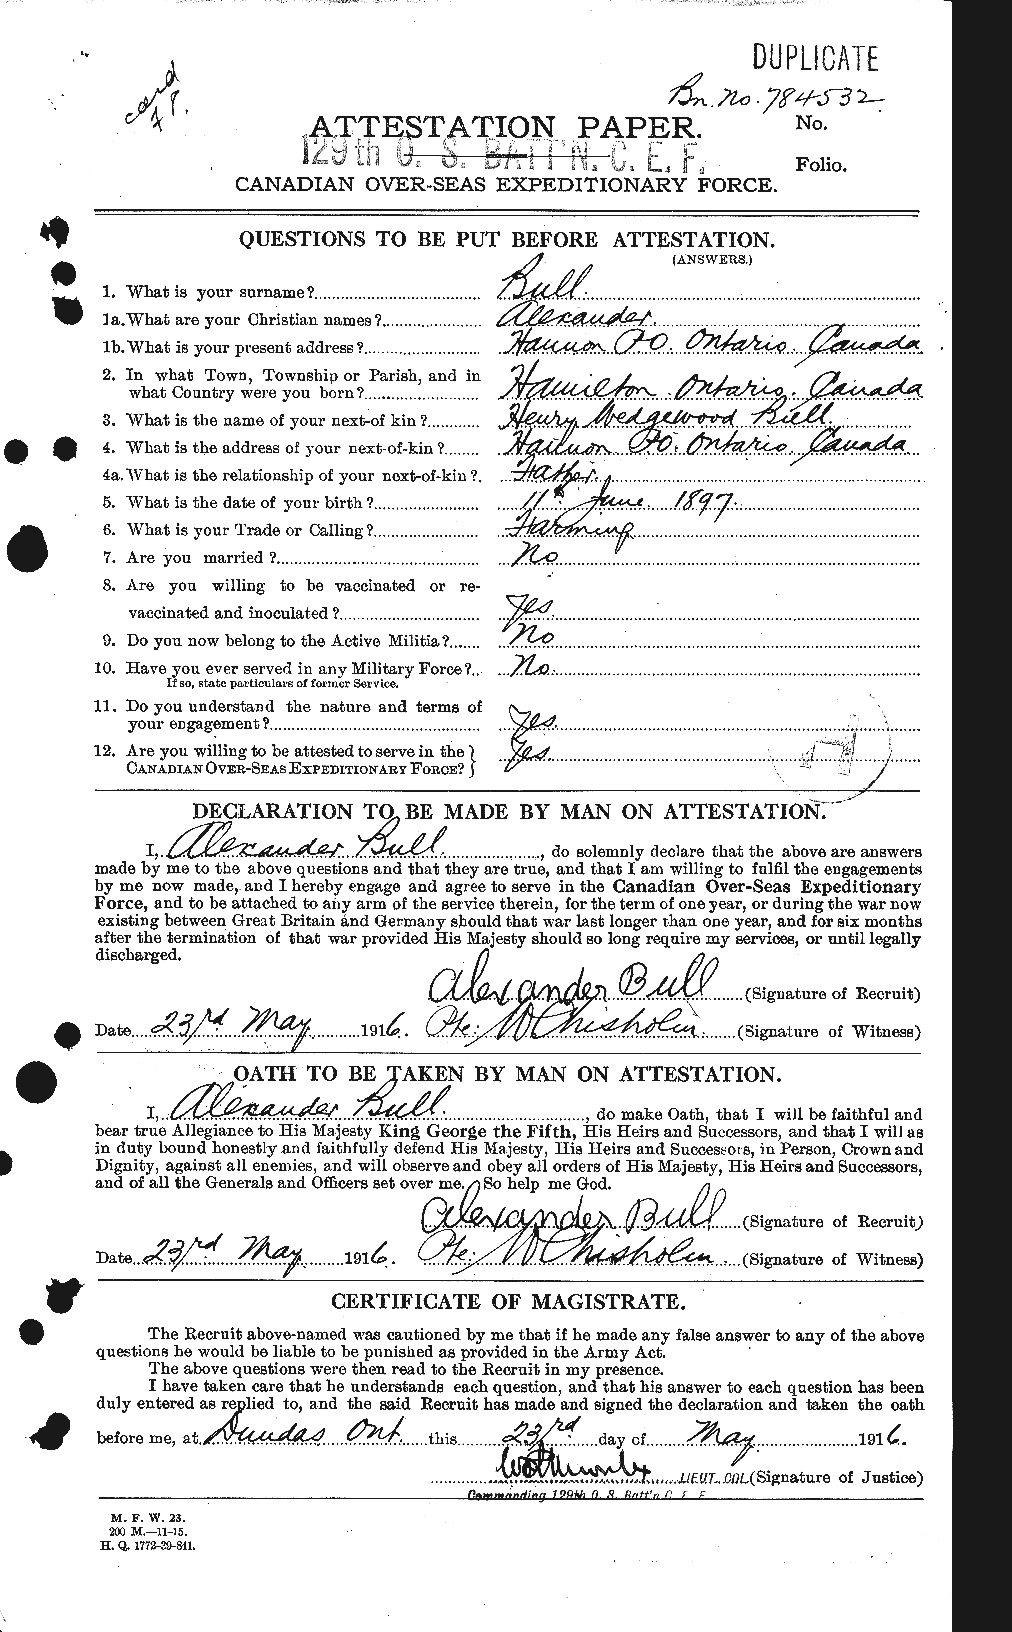 Personnel Records of the First World War - CEF 270653a